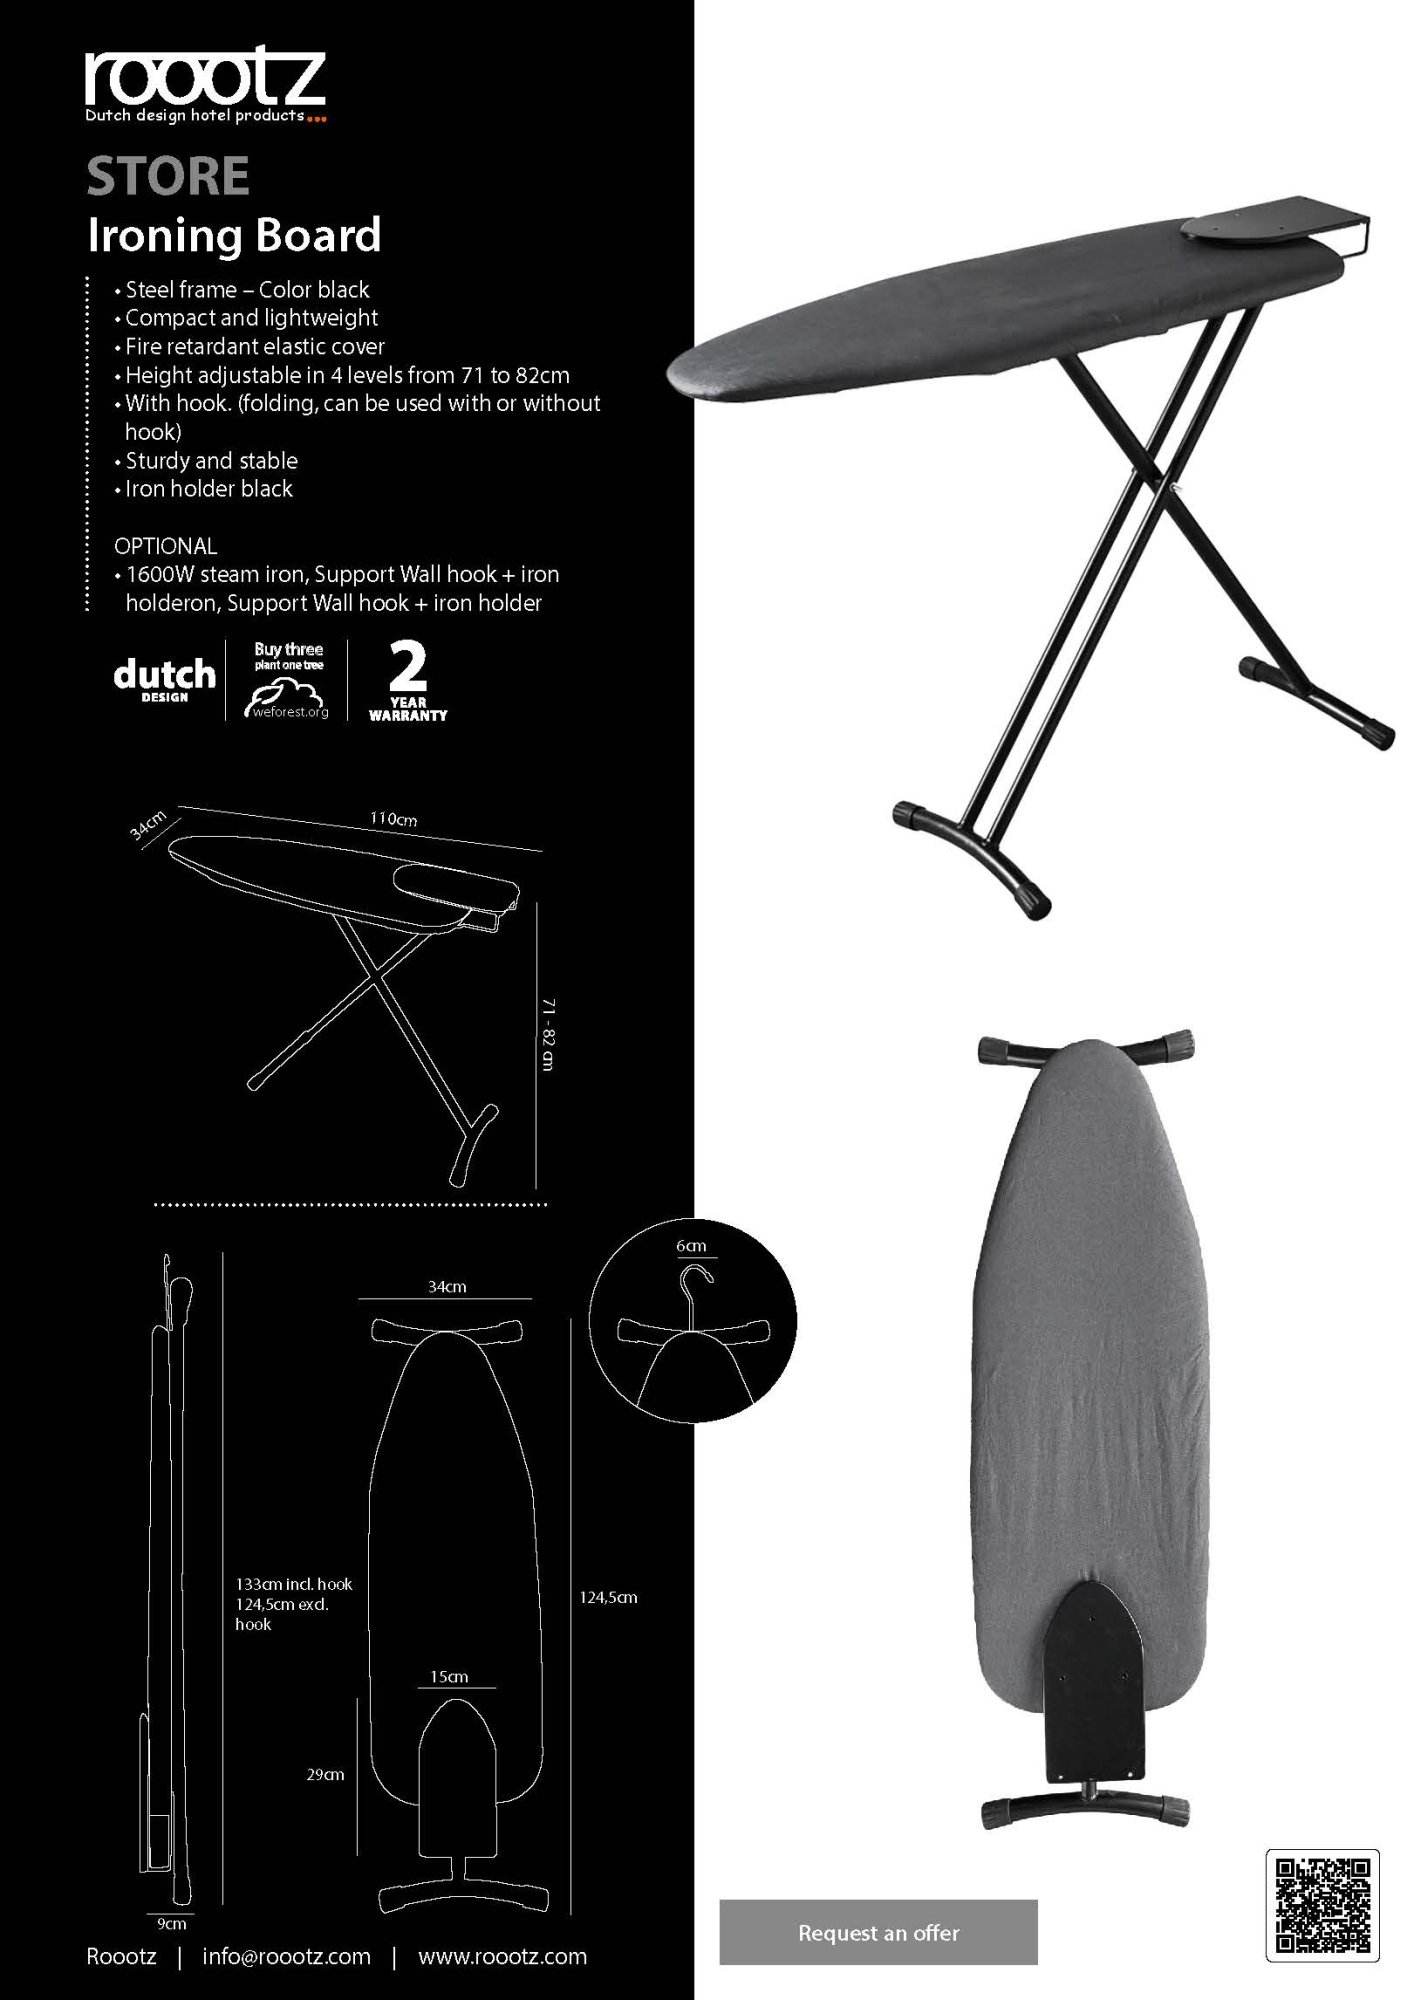 Ironing board for hotel with iron holder and hook